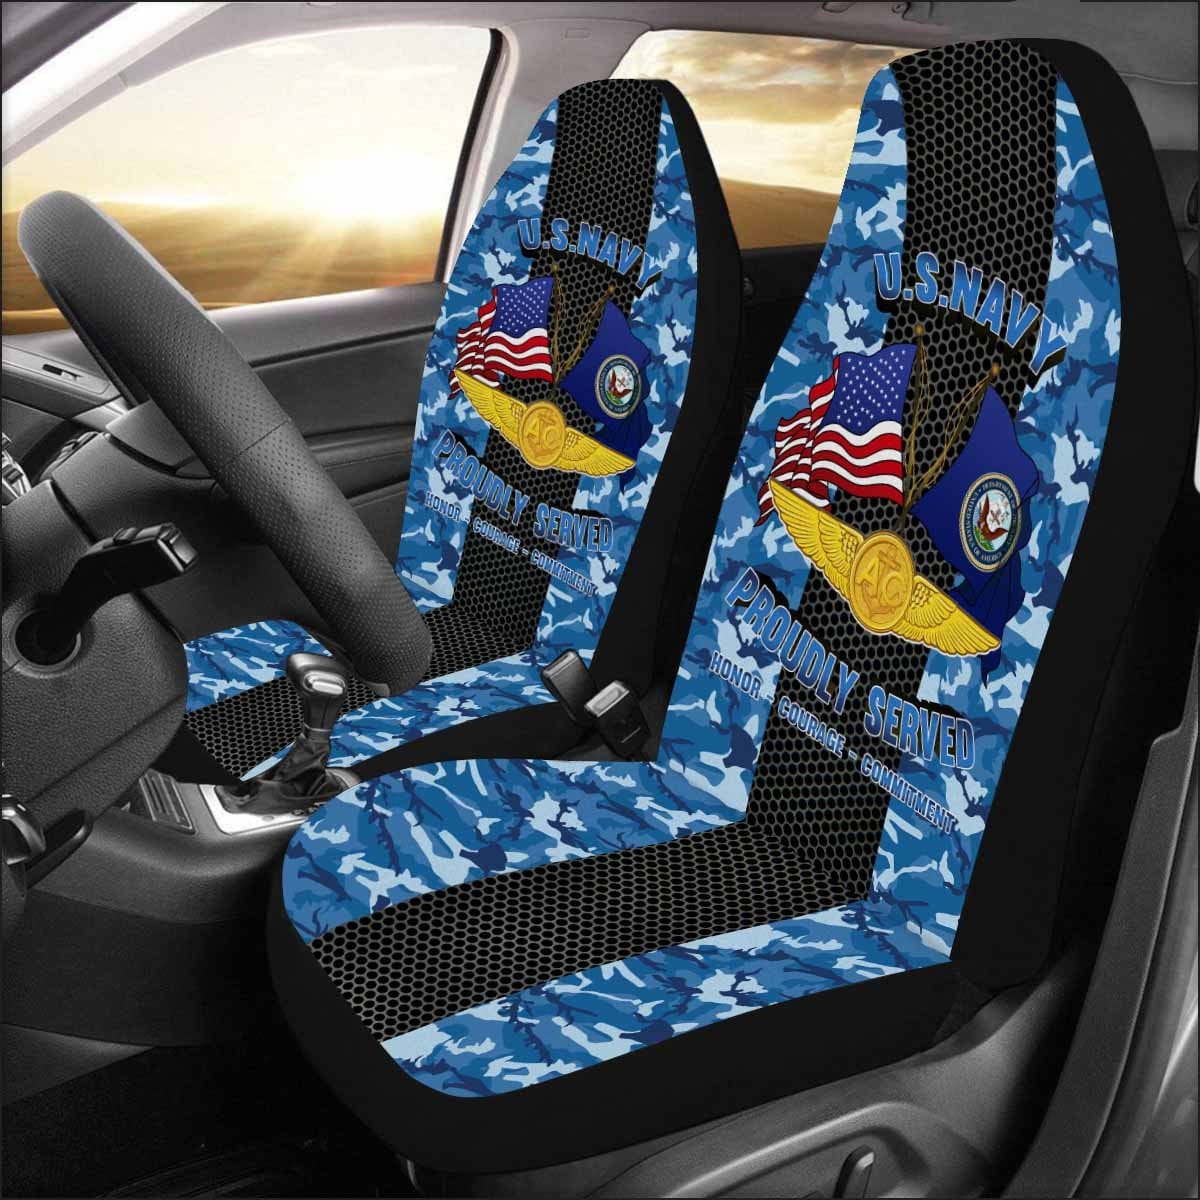 U.S NAVY NAVAL AIRCREW WARFARE SPECIALIST - Car Seat Covers (Set of 2)-SeatCovers-Navy-Badge-Veterans Nation